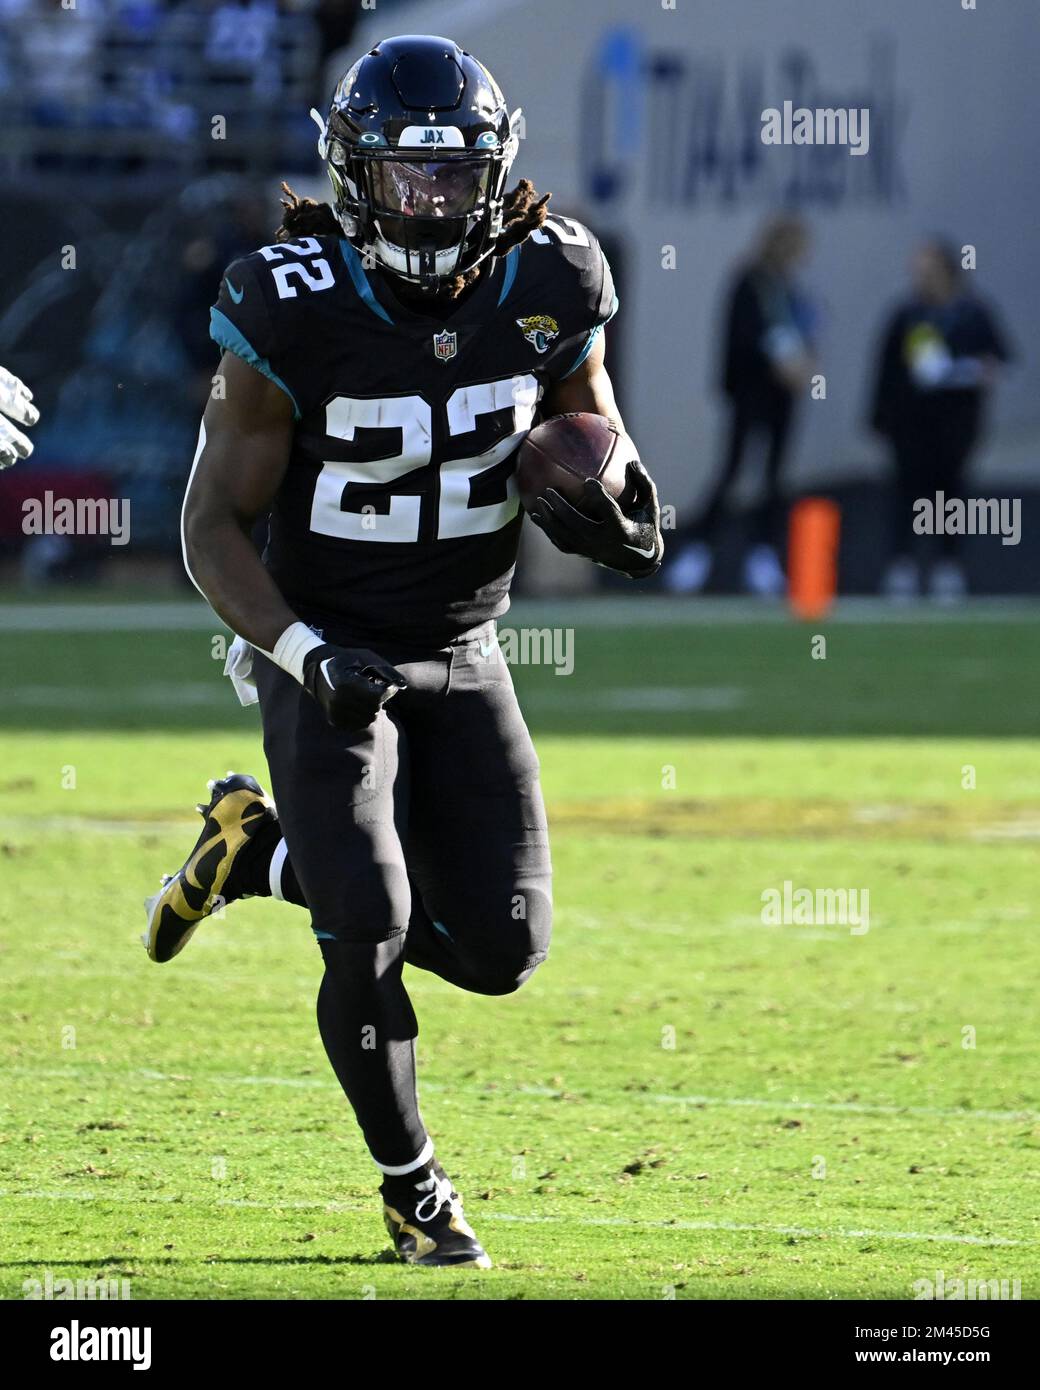 Jacksonville Jaguars running back JaMycal Hasty (22) runs after catching a  screen pass during the second half of an NFL football game against the  Baltimore Ravens, Sunday, Nov. 27, 2022, in Jacksonville